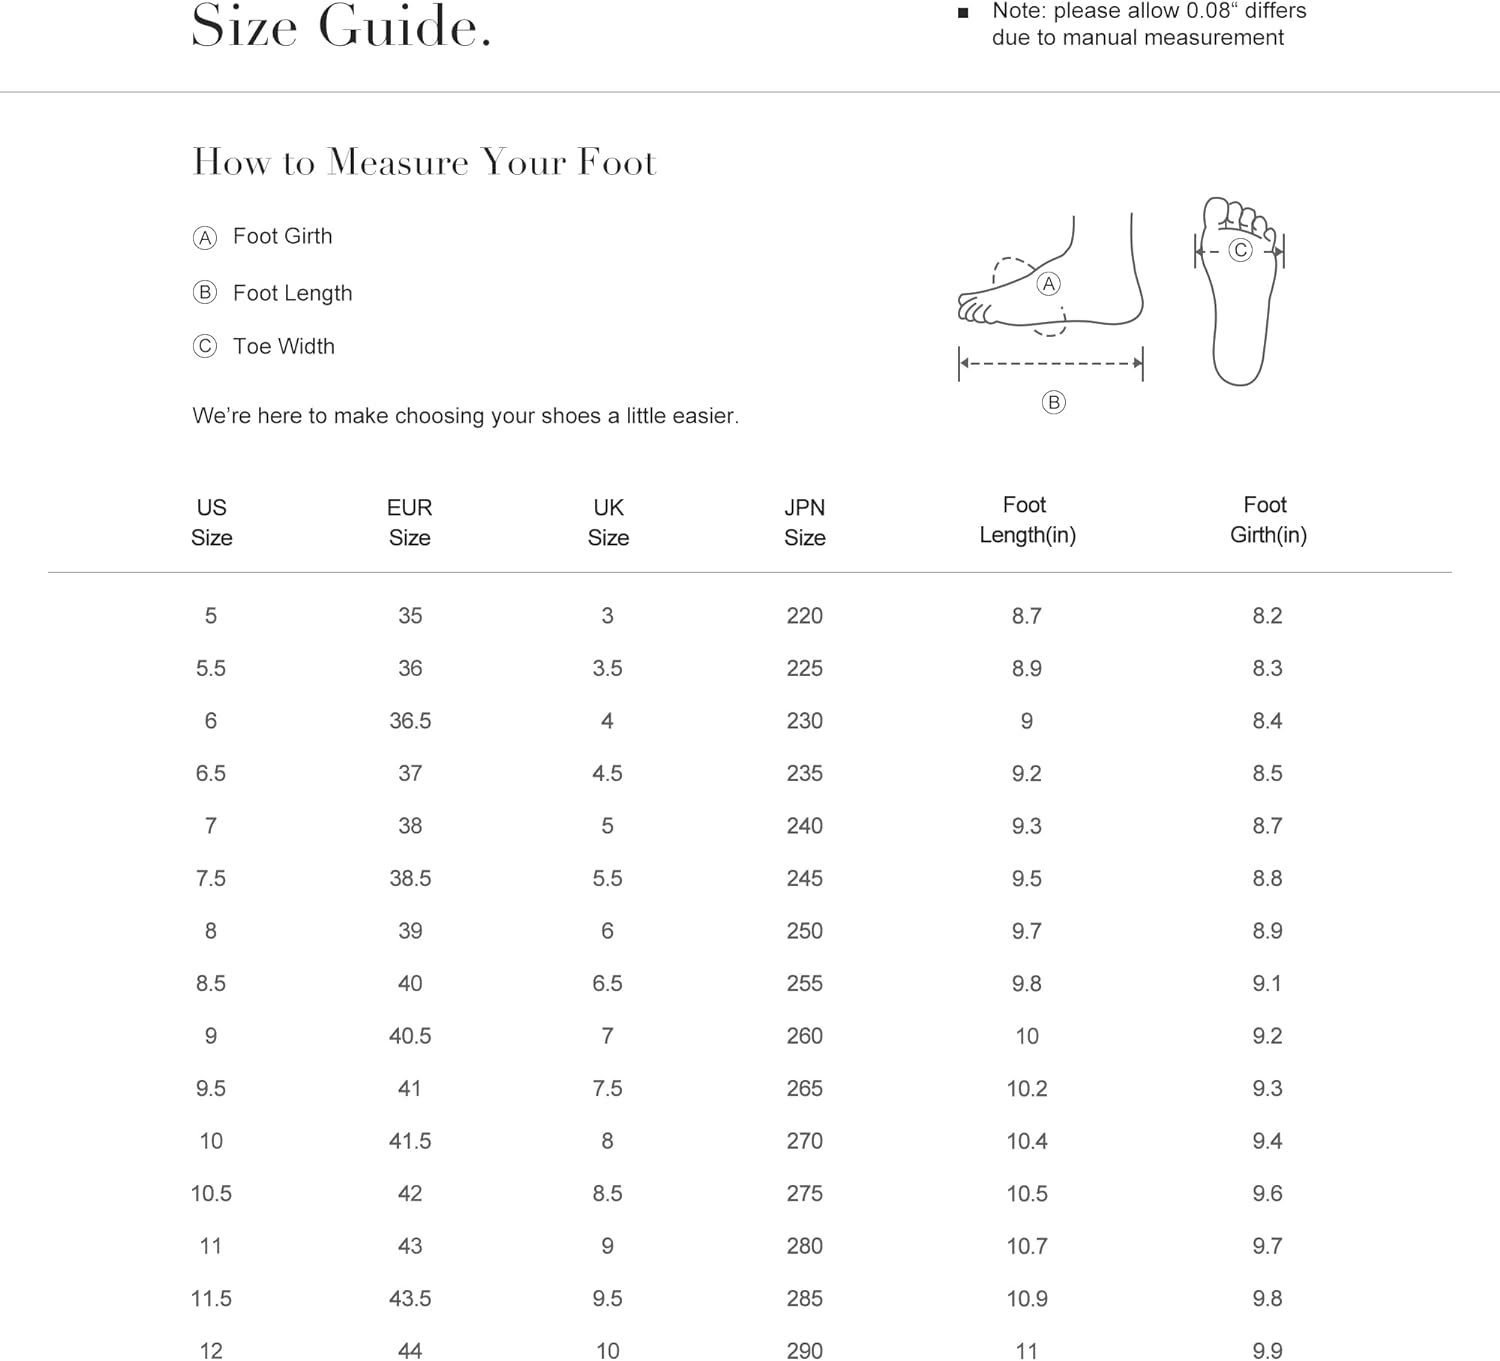 DREAM PAIRS Heels for Women Block Chunky Platform High Heels Open Toe Fashion Wedding Party Evening Prom Dance Ankle Strap Dress Pump Sandals Shoes